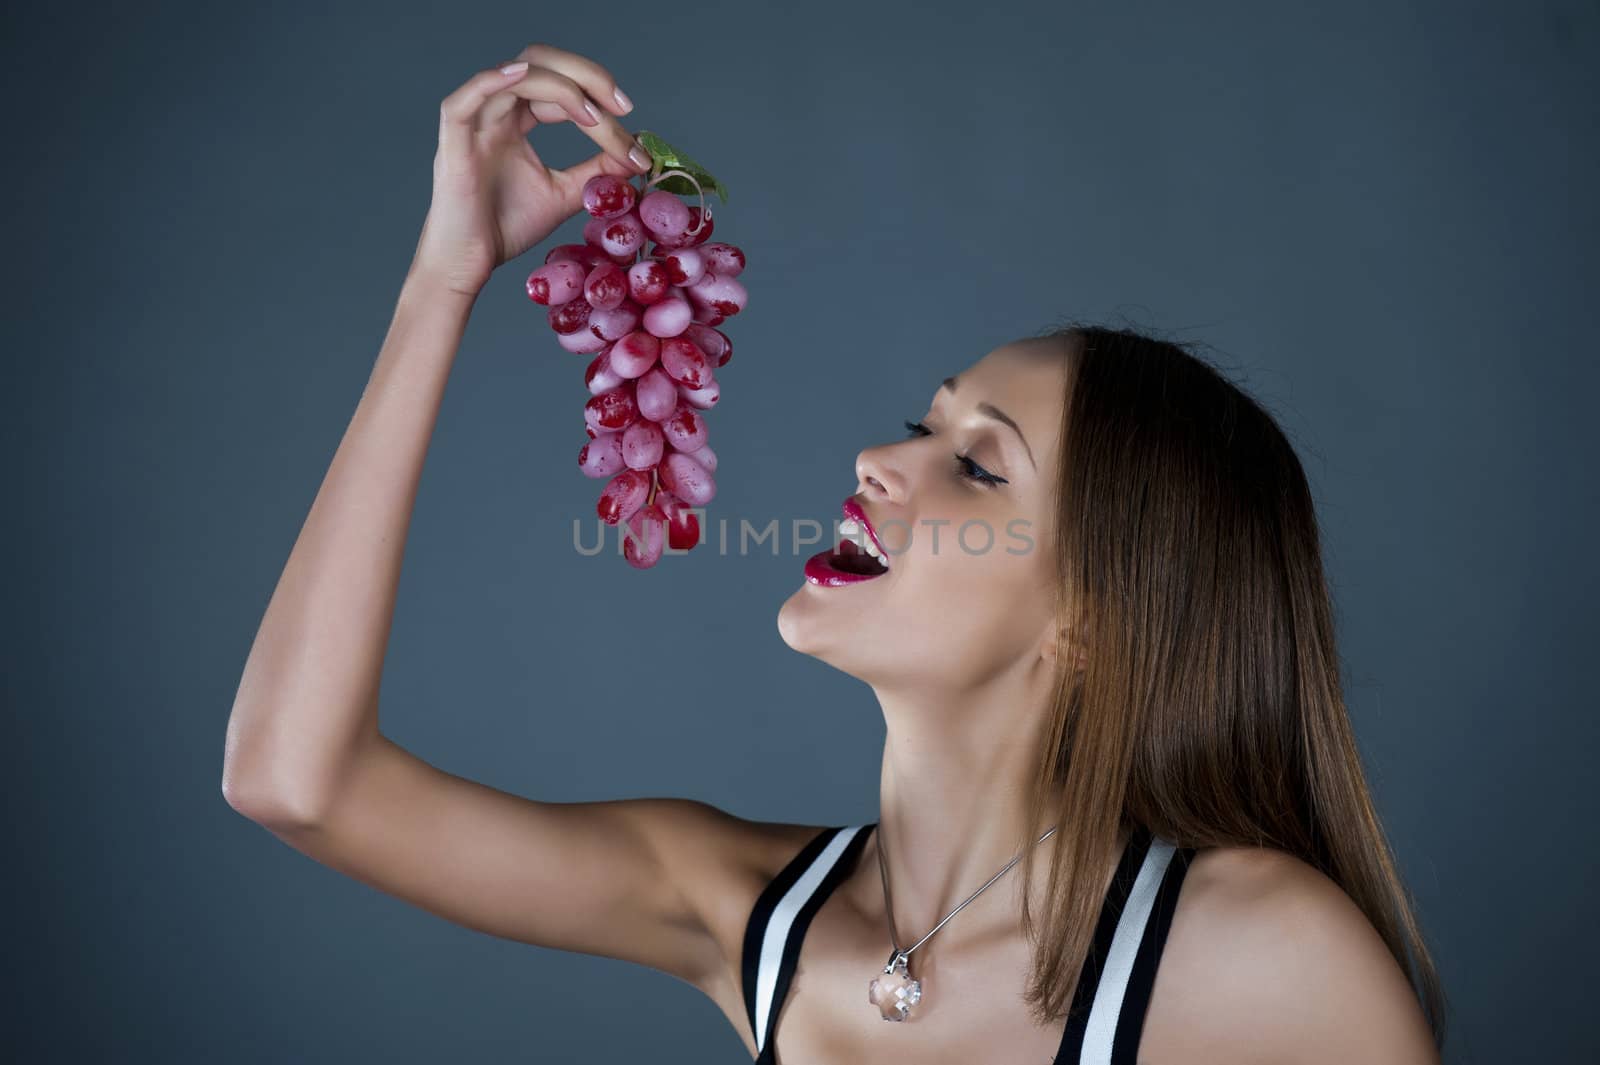 The beautiful girl with grapes by Aleksandr